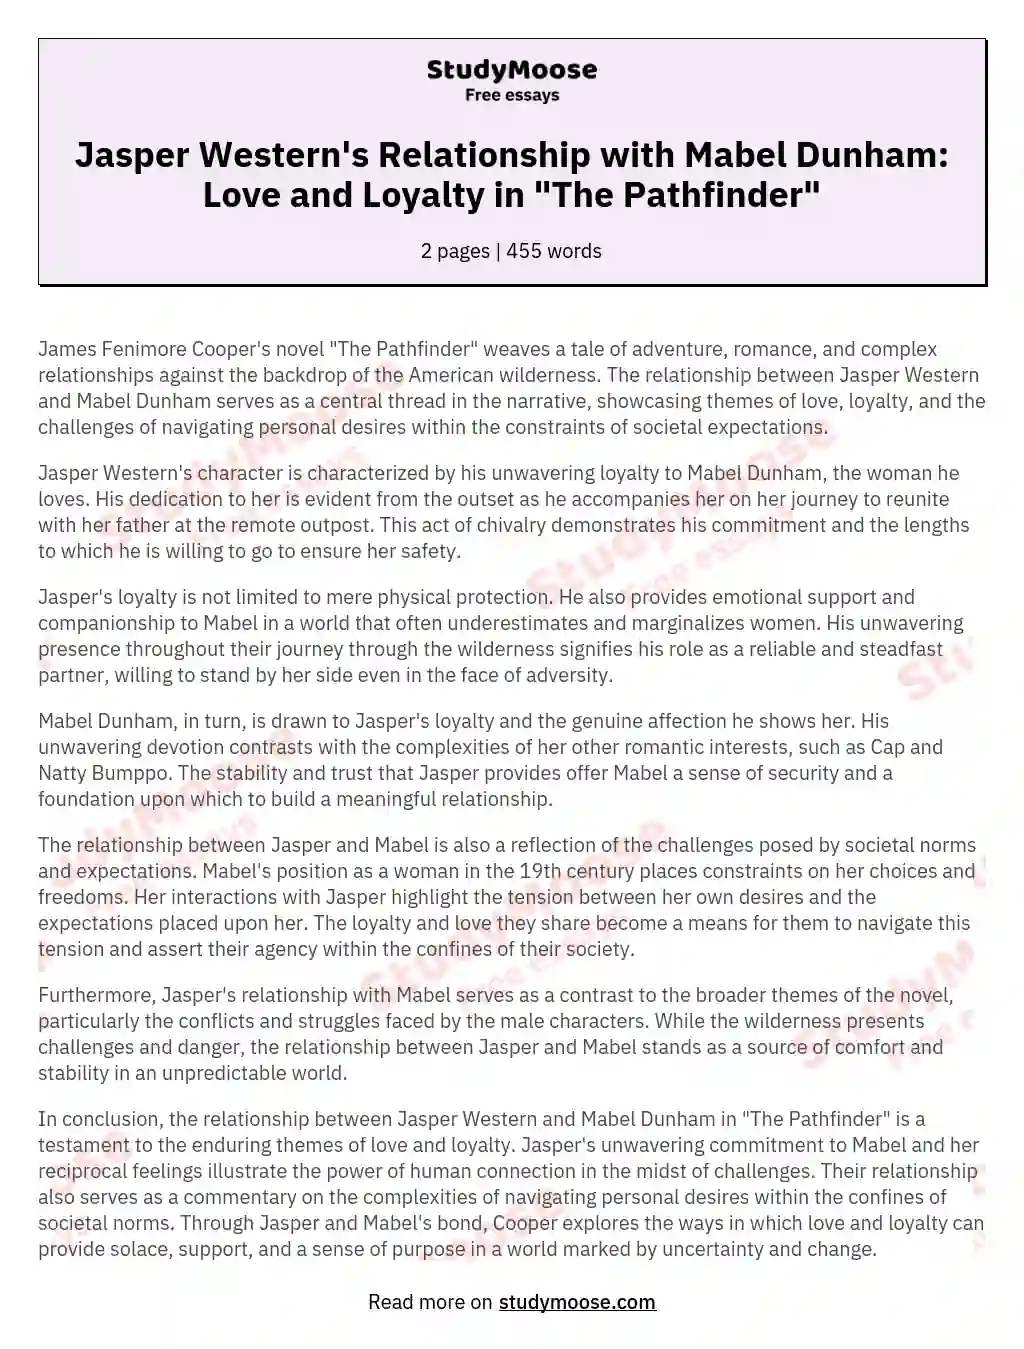 Jasper Western's Relationship with Mabel Dunham: Love and Loyalty in "The Pathfinder" essay